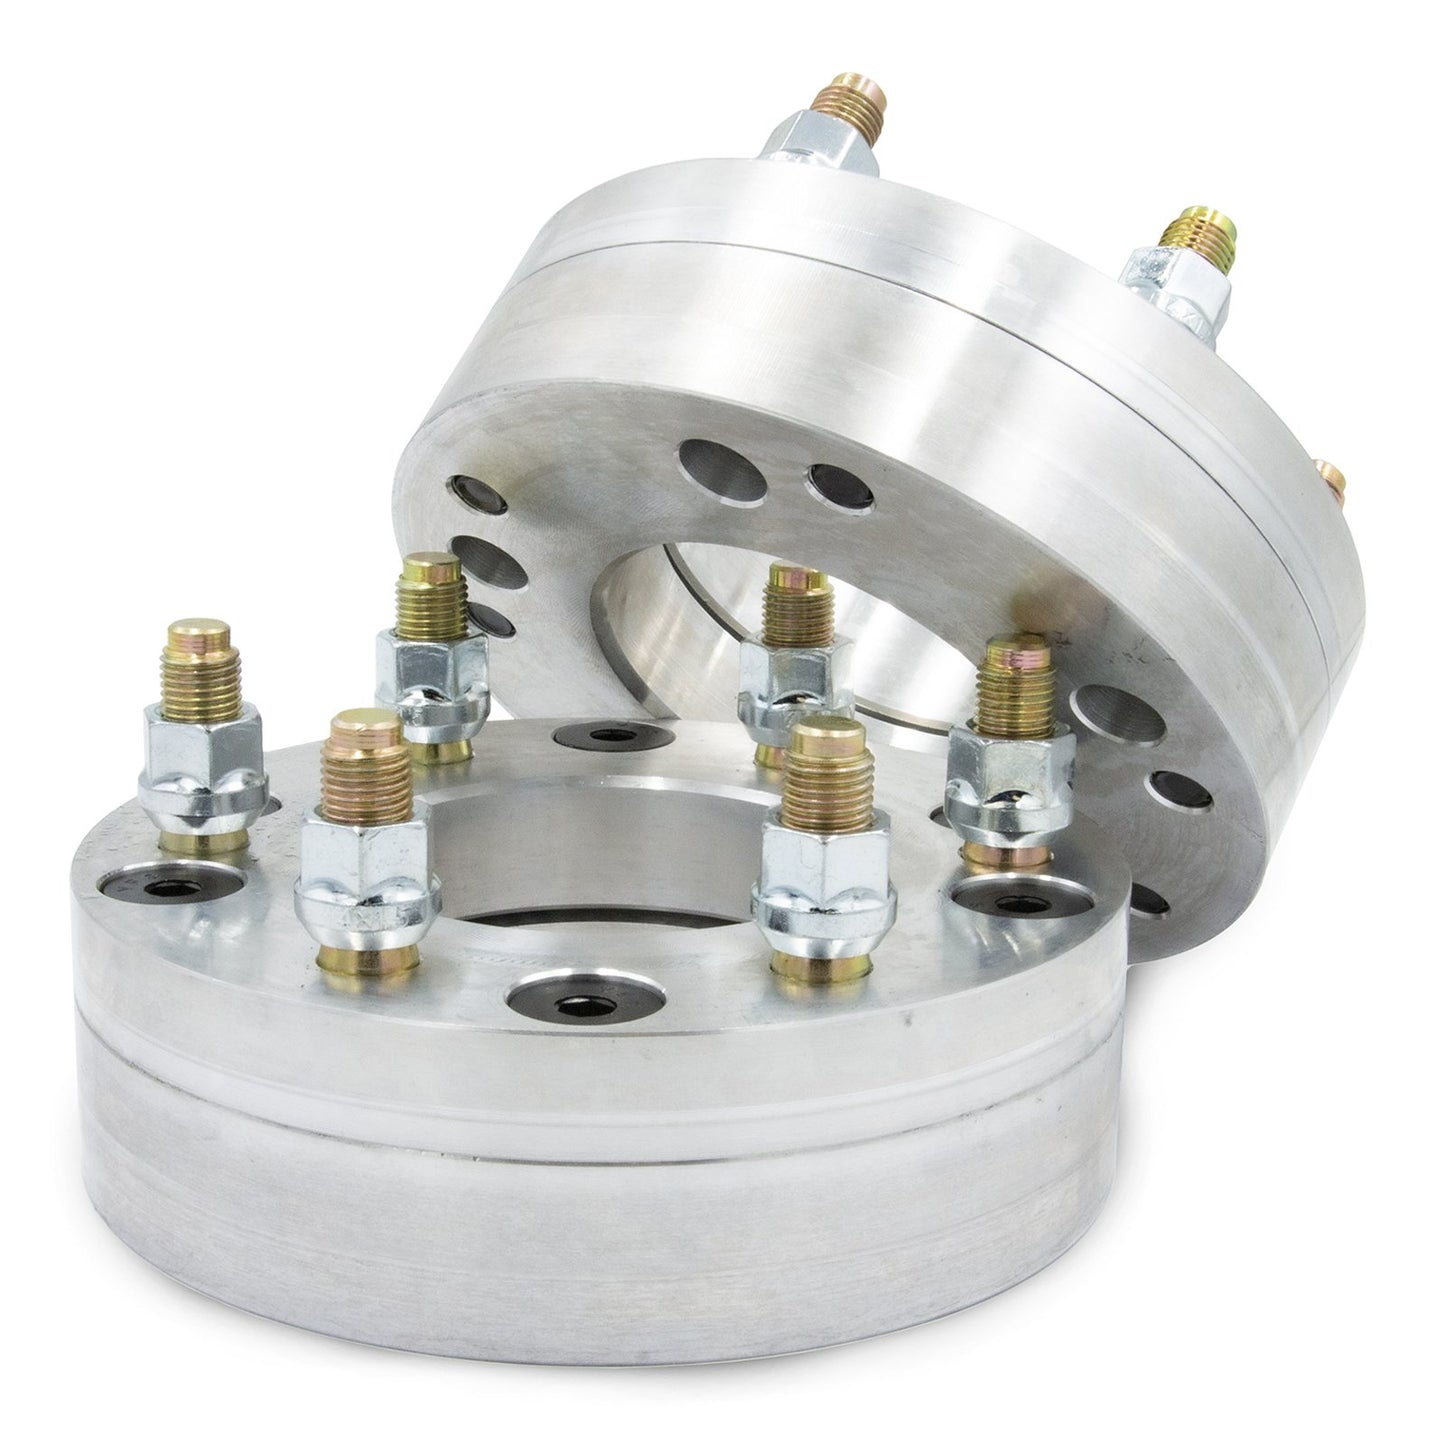 5x150 to 6x5.5" 2 piece Wheel Adapter - Thickness: 1.5" - 3"